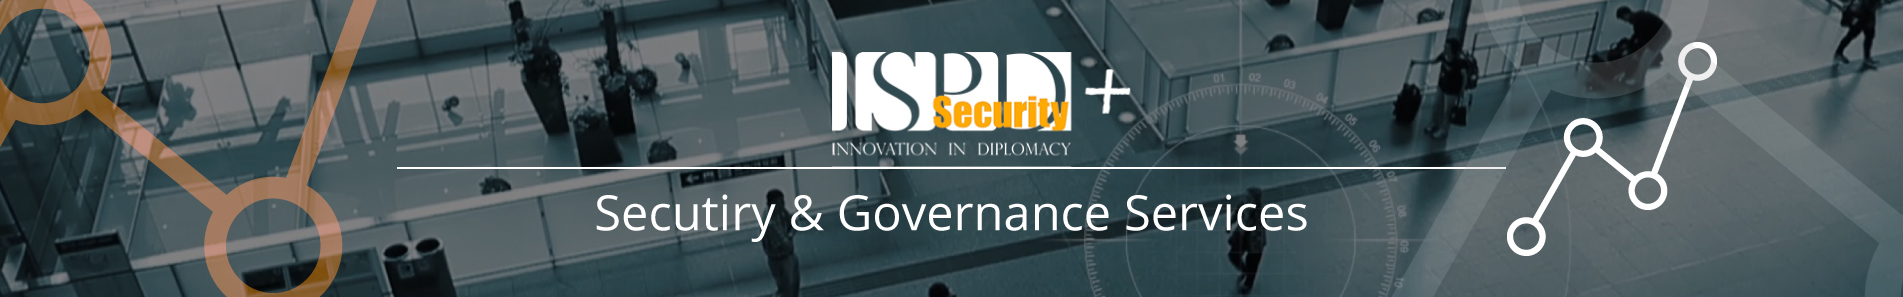 ISPD Security